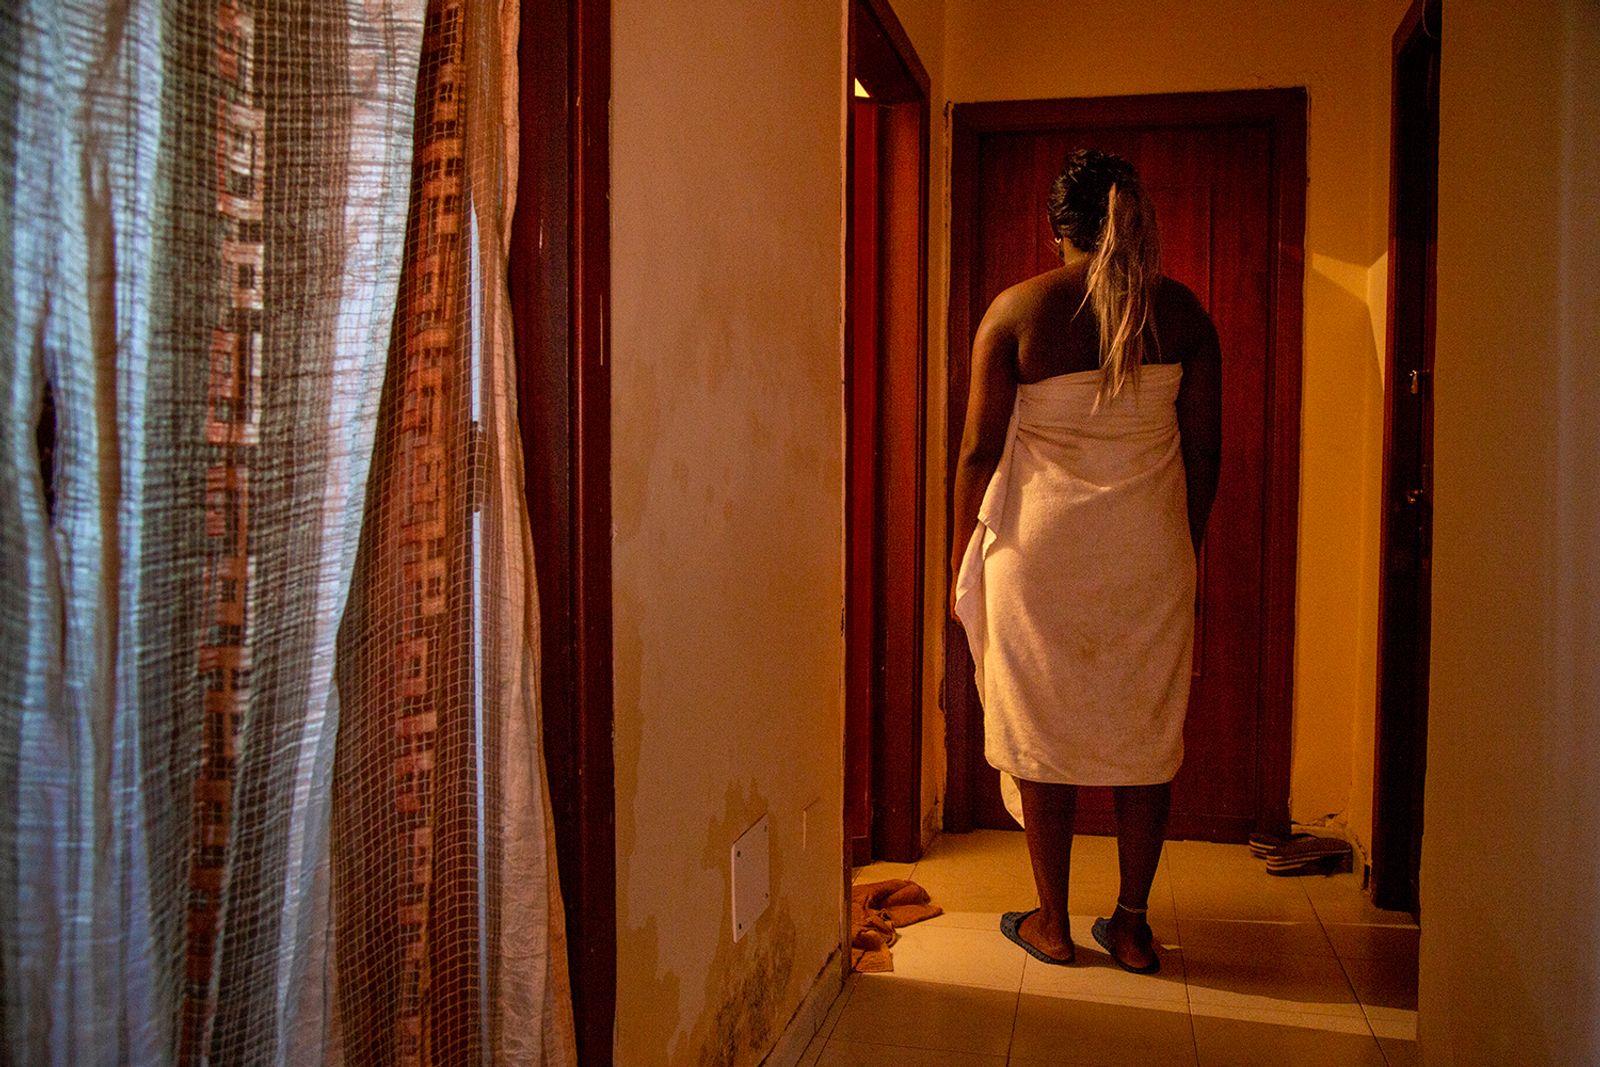 © Alessio Paduano - Image from the Contemporary slavery: the lost daughters of Nigeria photography project